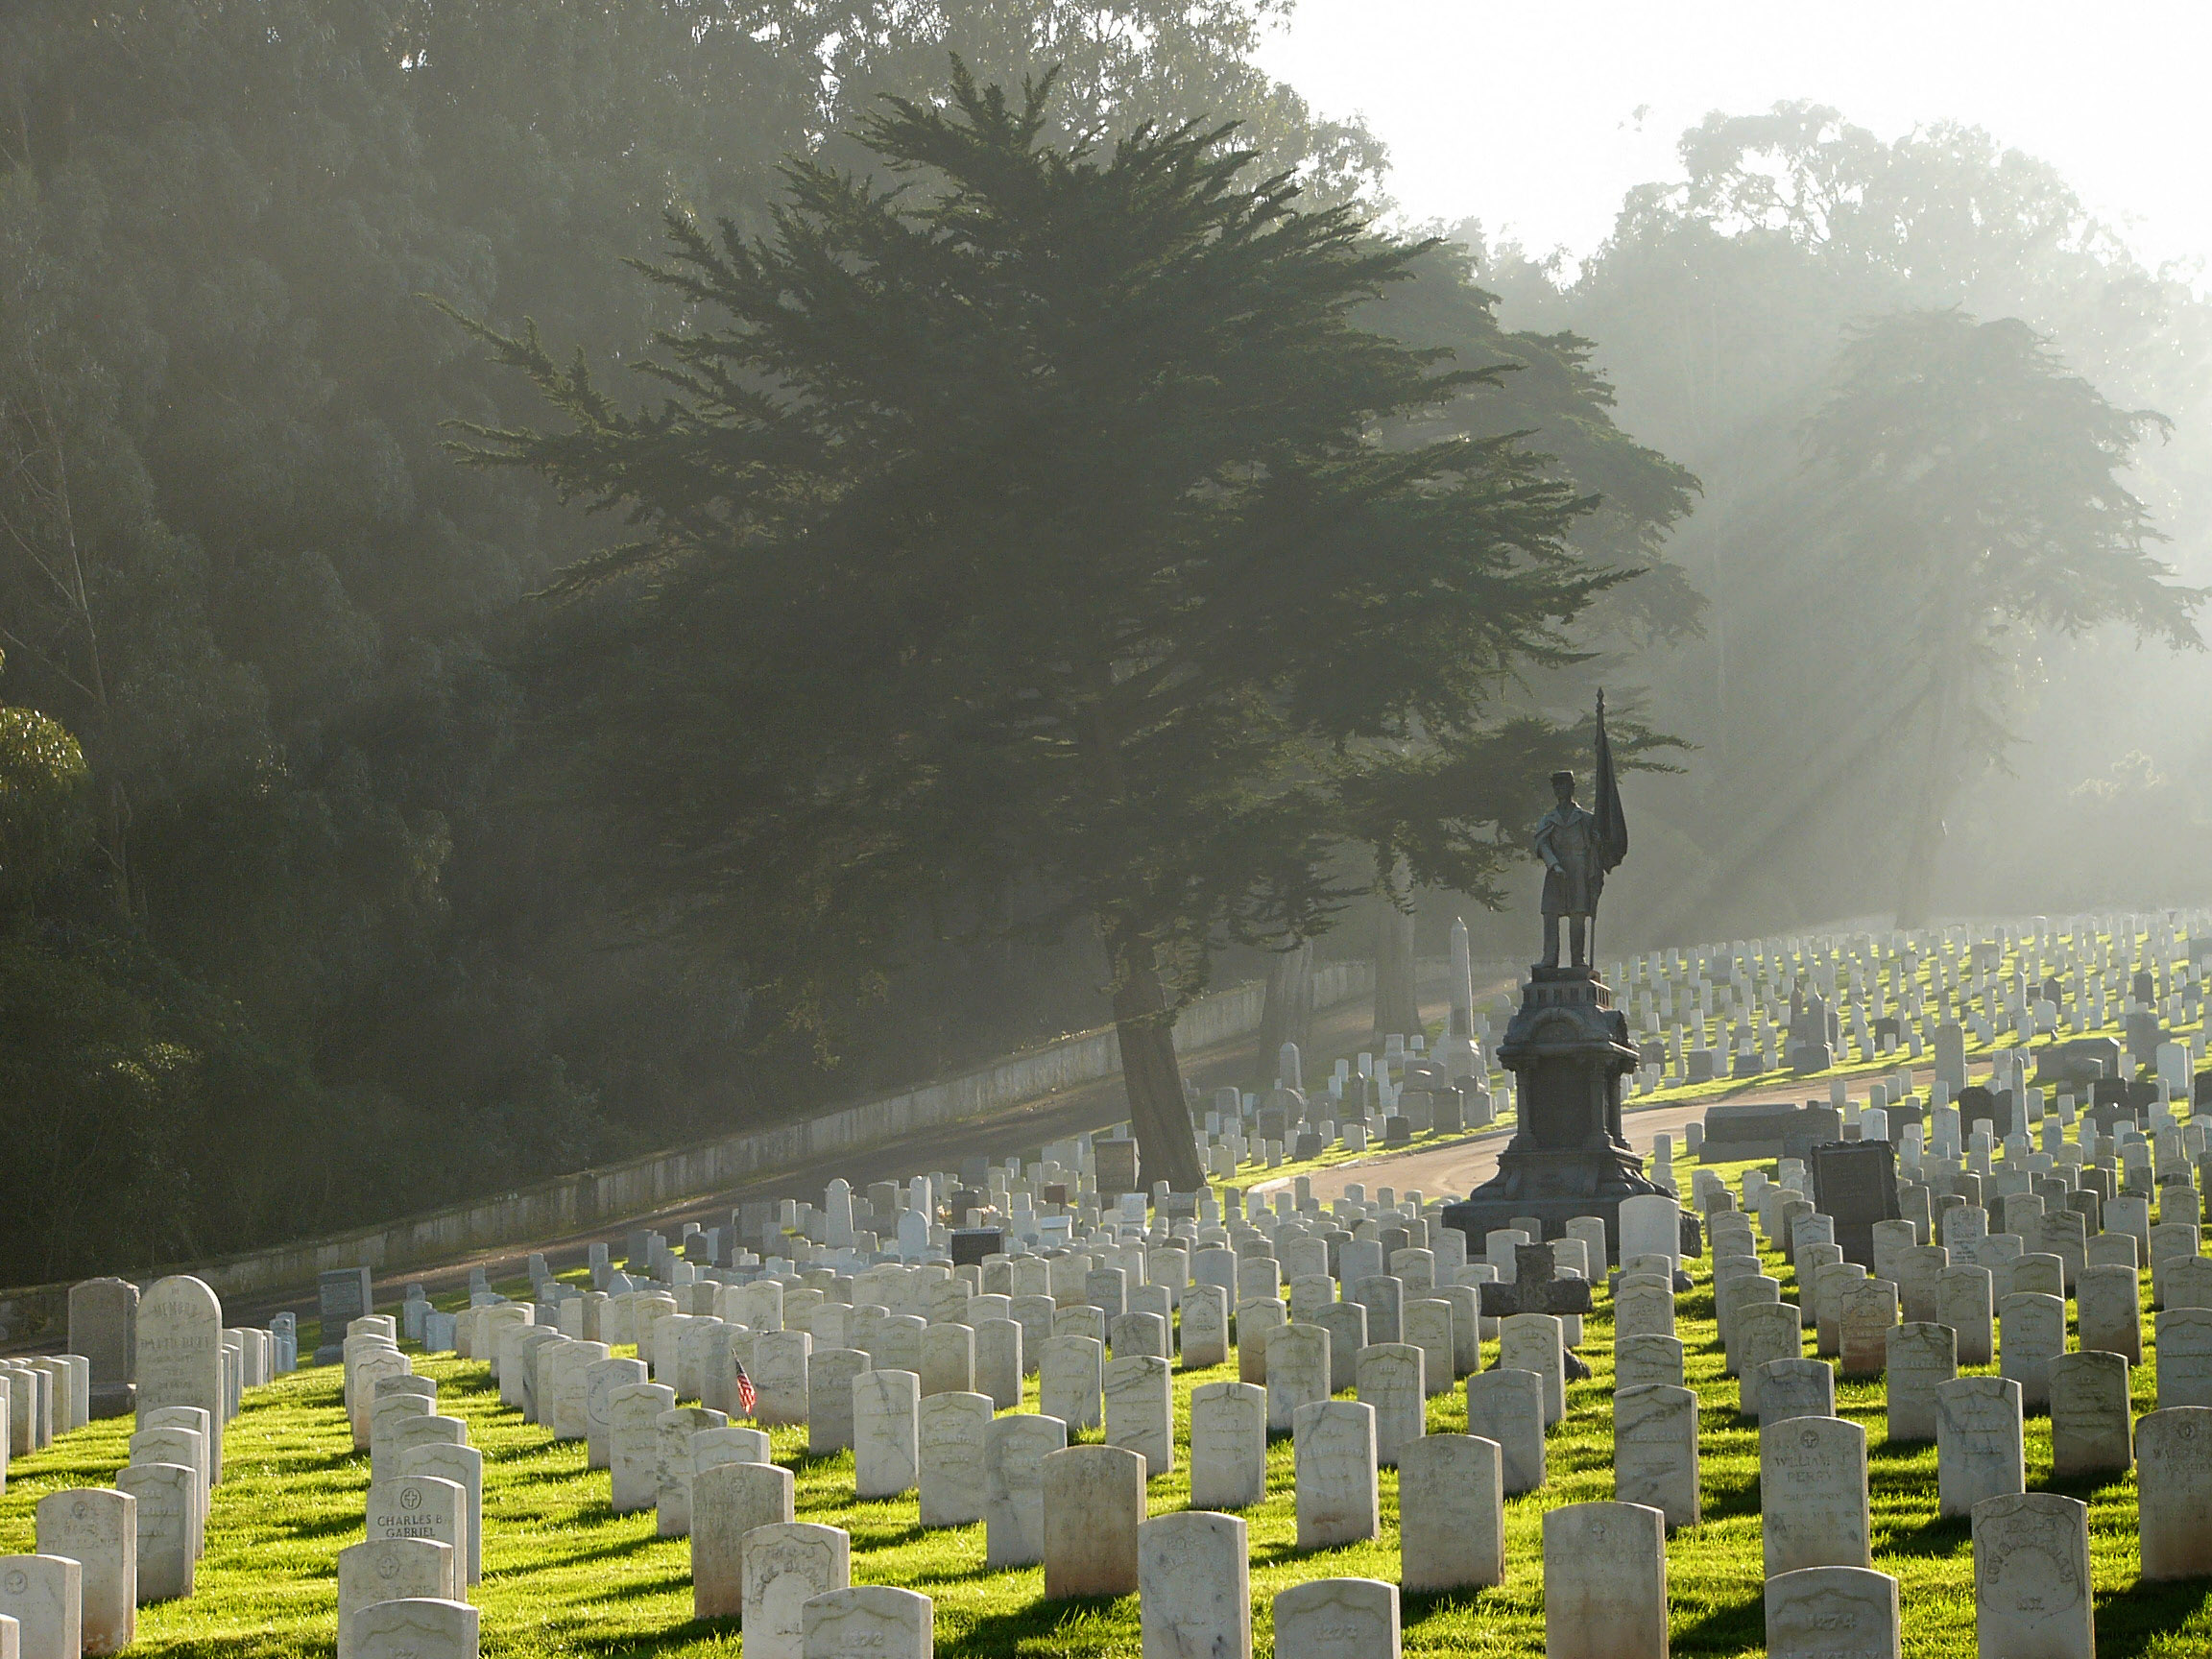 Rows of grave markers in the green grass of the cemetery as light shafts through misty trees.